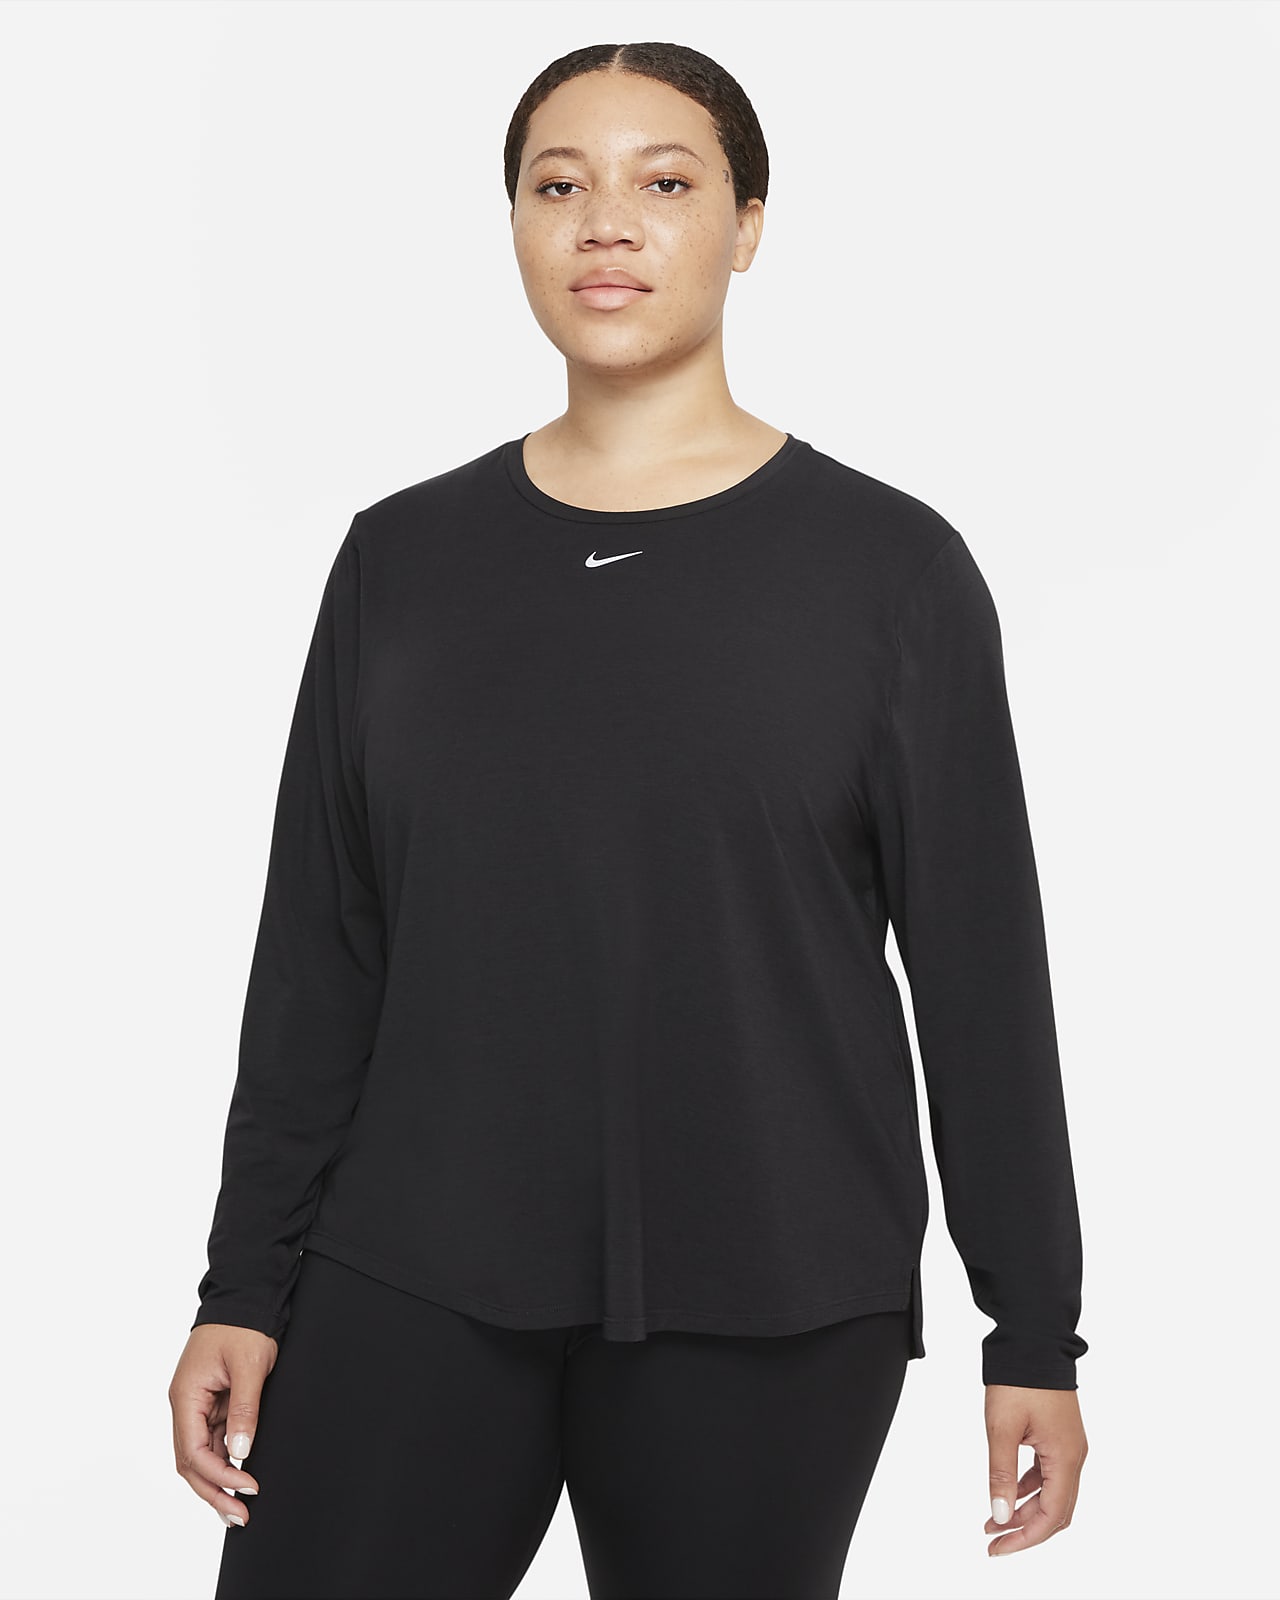 sejle stavelse segment Nike Dri-FIT UV One Luxe Women's Standard Fit Long-Sleeve Top (Plus Size).  Nike.com